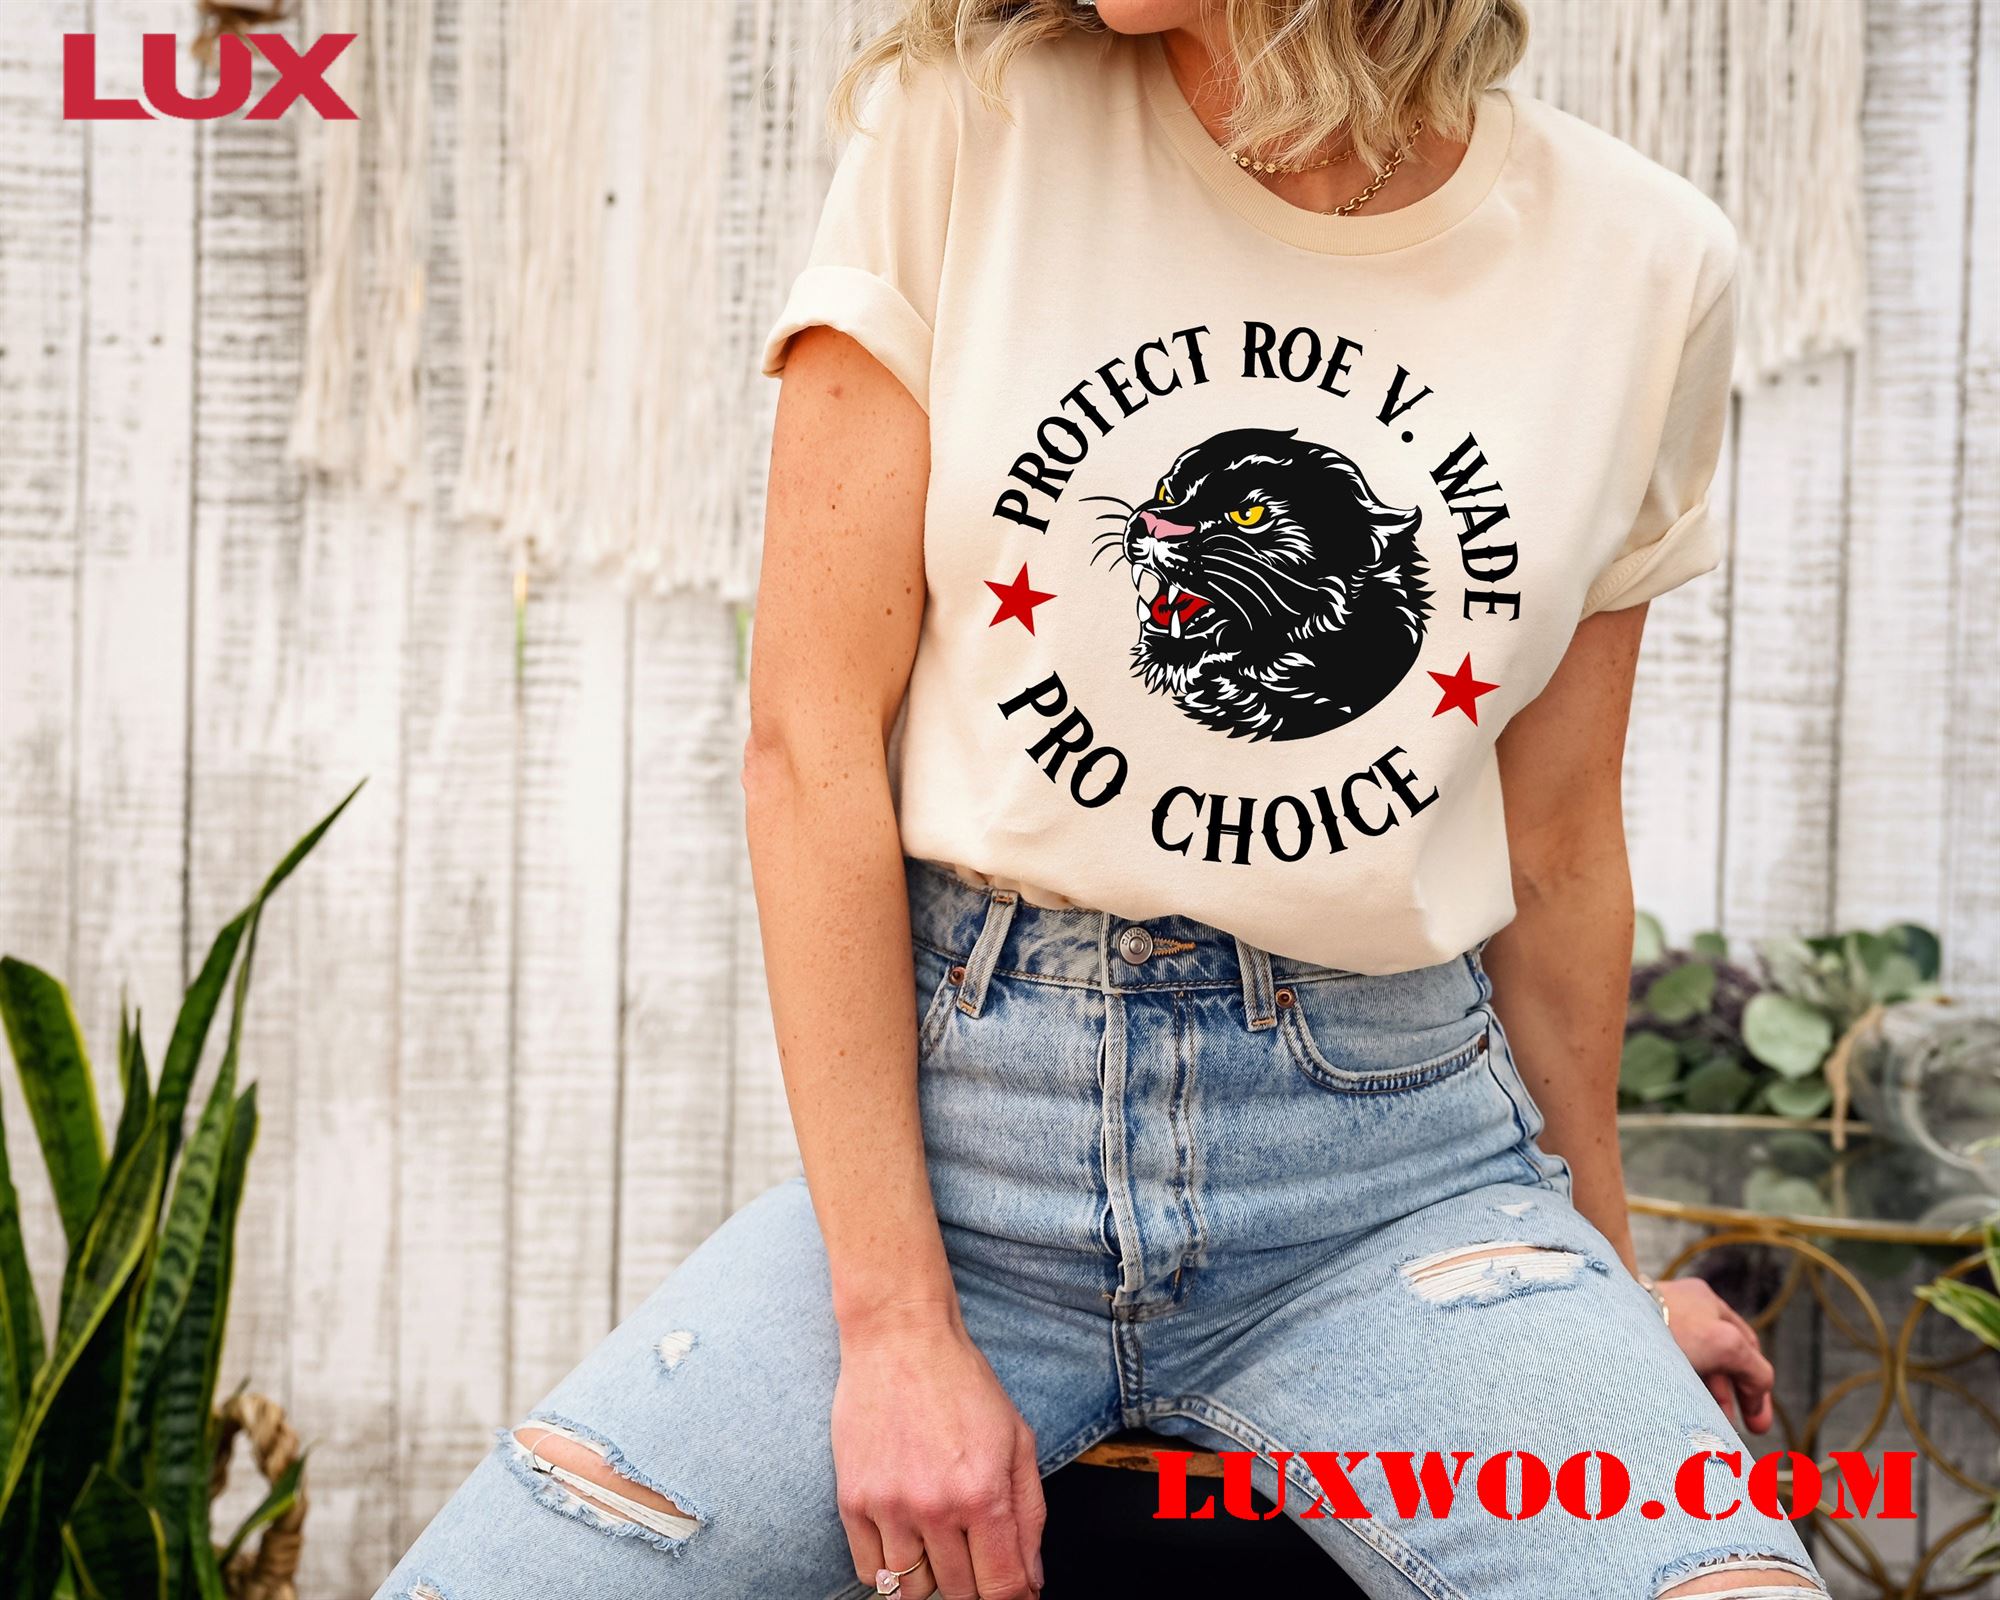 Empower Women's Rights With Pro Choice Protect Roe V Wade Shirt 